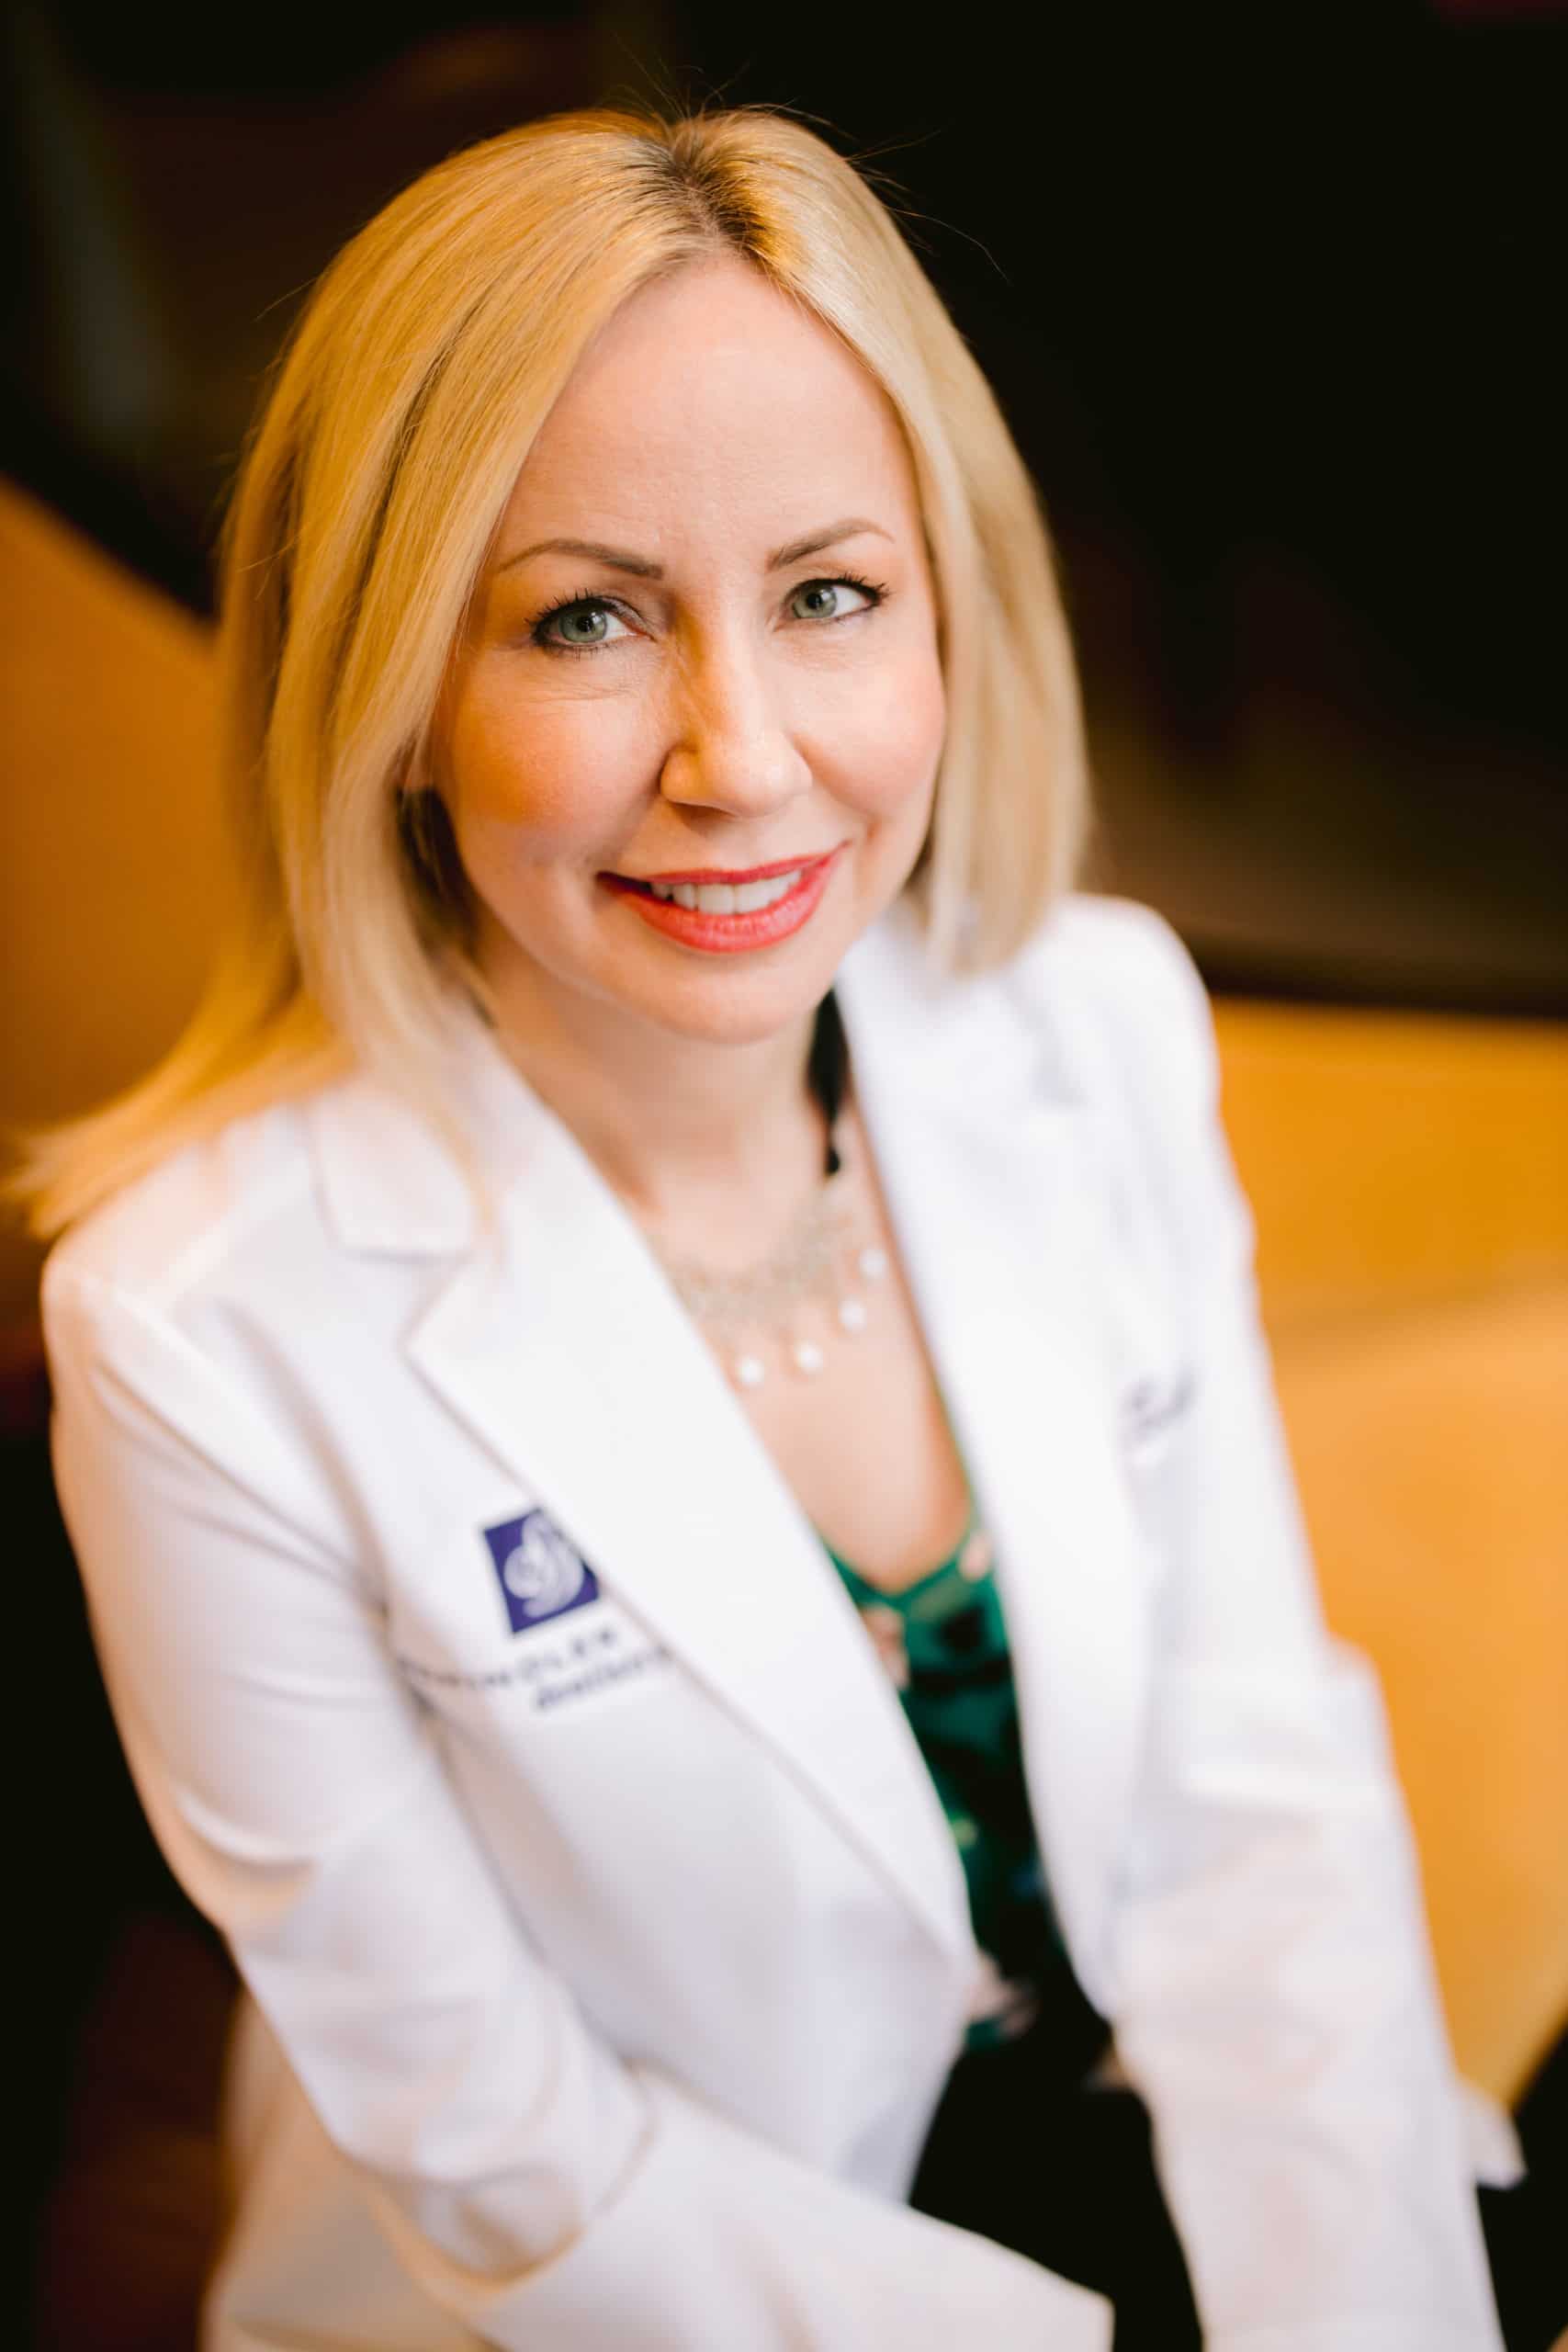 Profile photo of Dr. Sharon E. Schindler, a Dentist in Columbus.